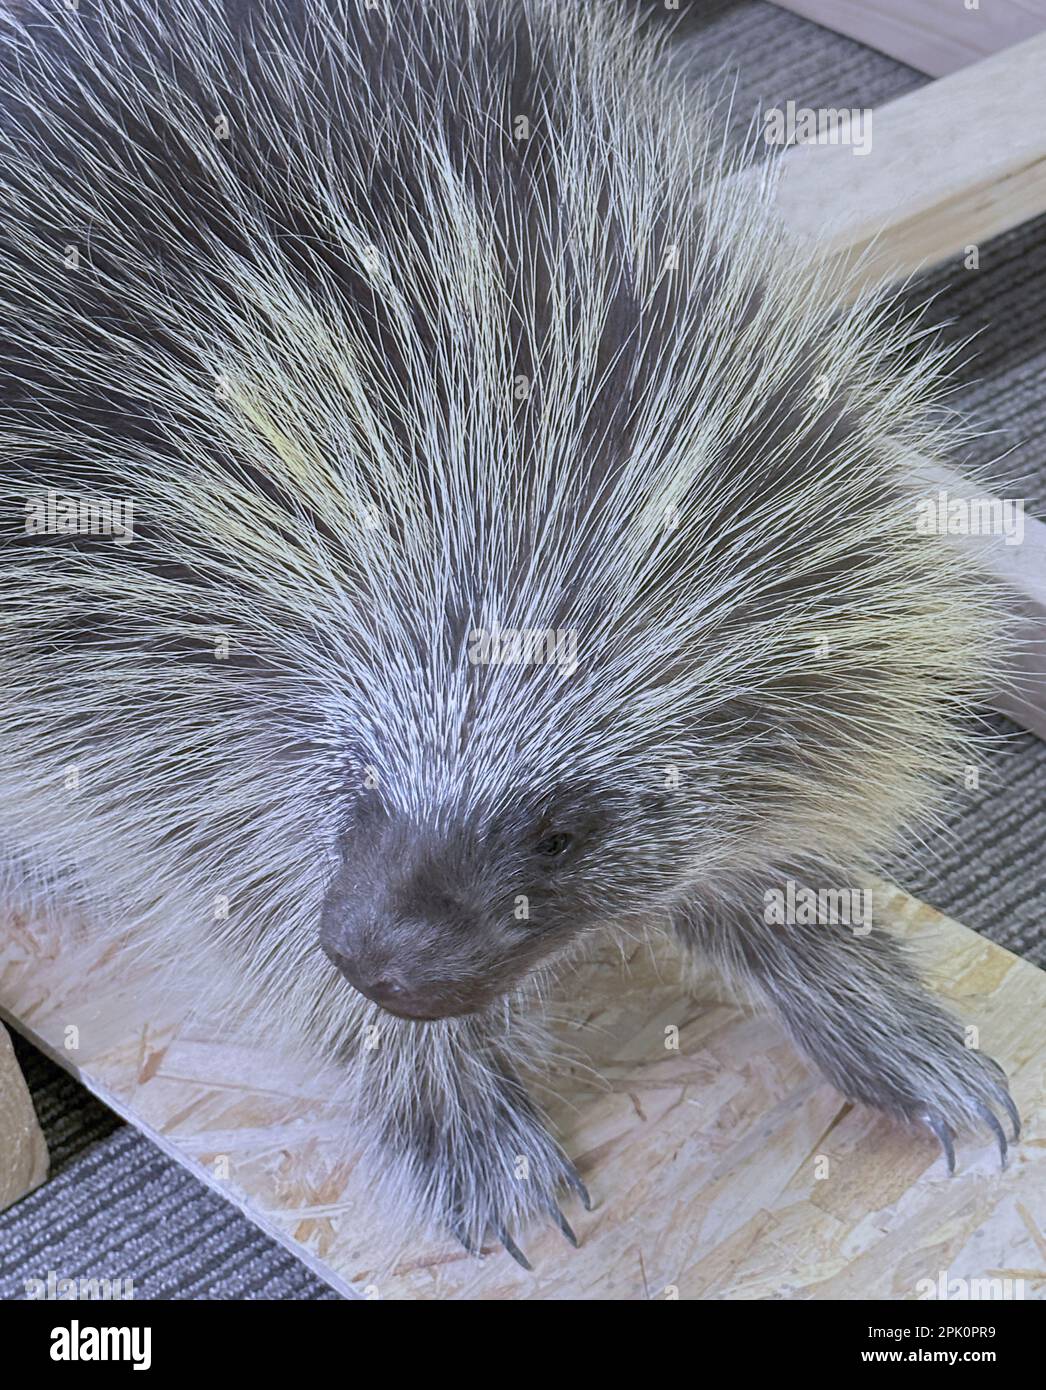 https://c8.alamy.com/comp/2PK0PR9/the-porcupine-is-on-display-with-front-pawsfacehead-and-body-with-quills-he-is-looking-to-the-side-with-open-eyes-he-is-on-a-display-board-2PK0PR9.jpg